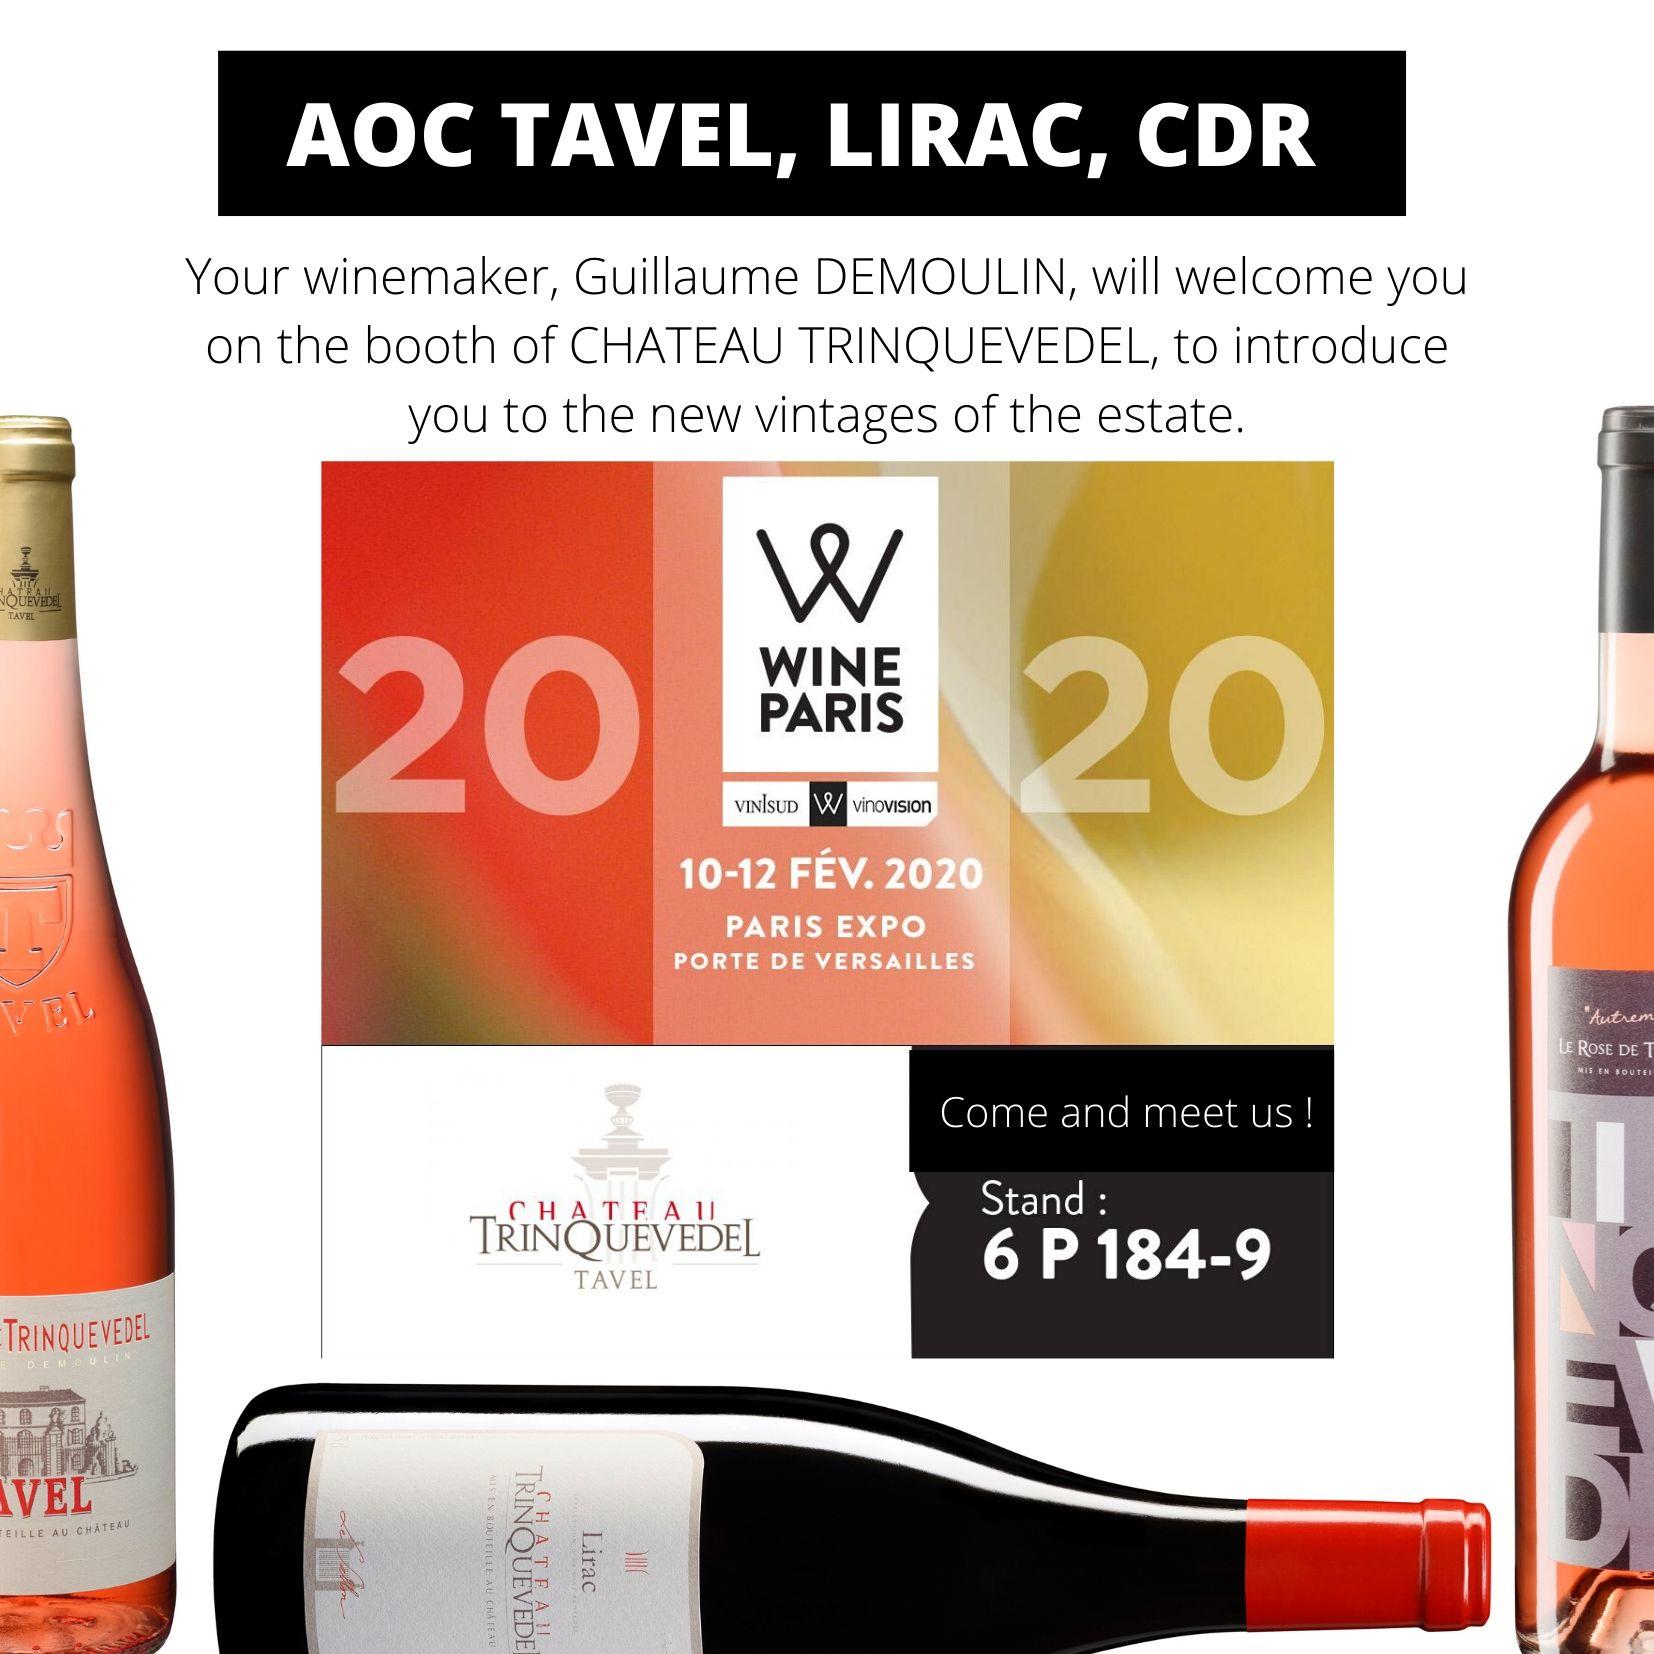 WINE PARIS 2020 : WE'LL BE THERE! HALL 6 ALLEE P STAND 184-9